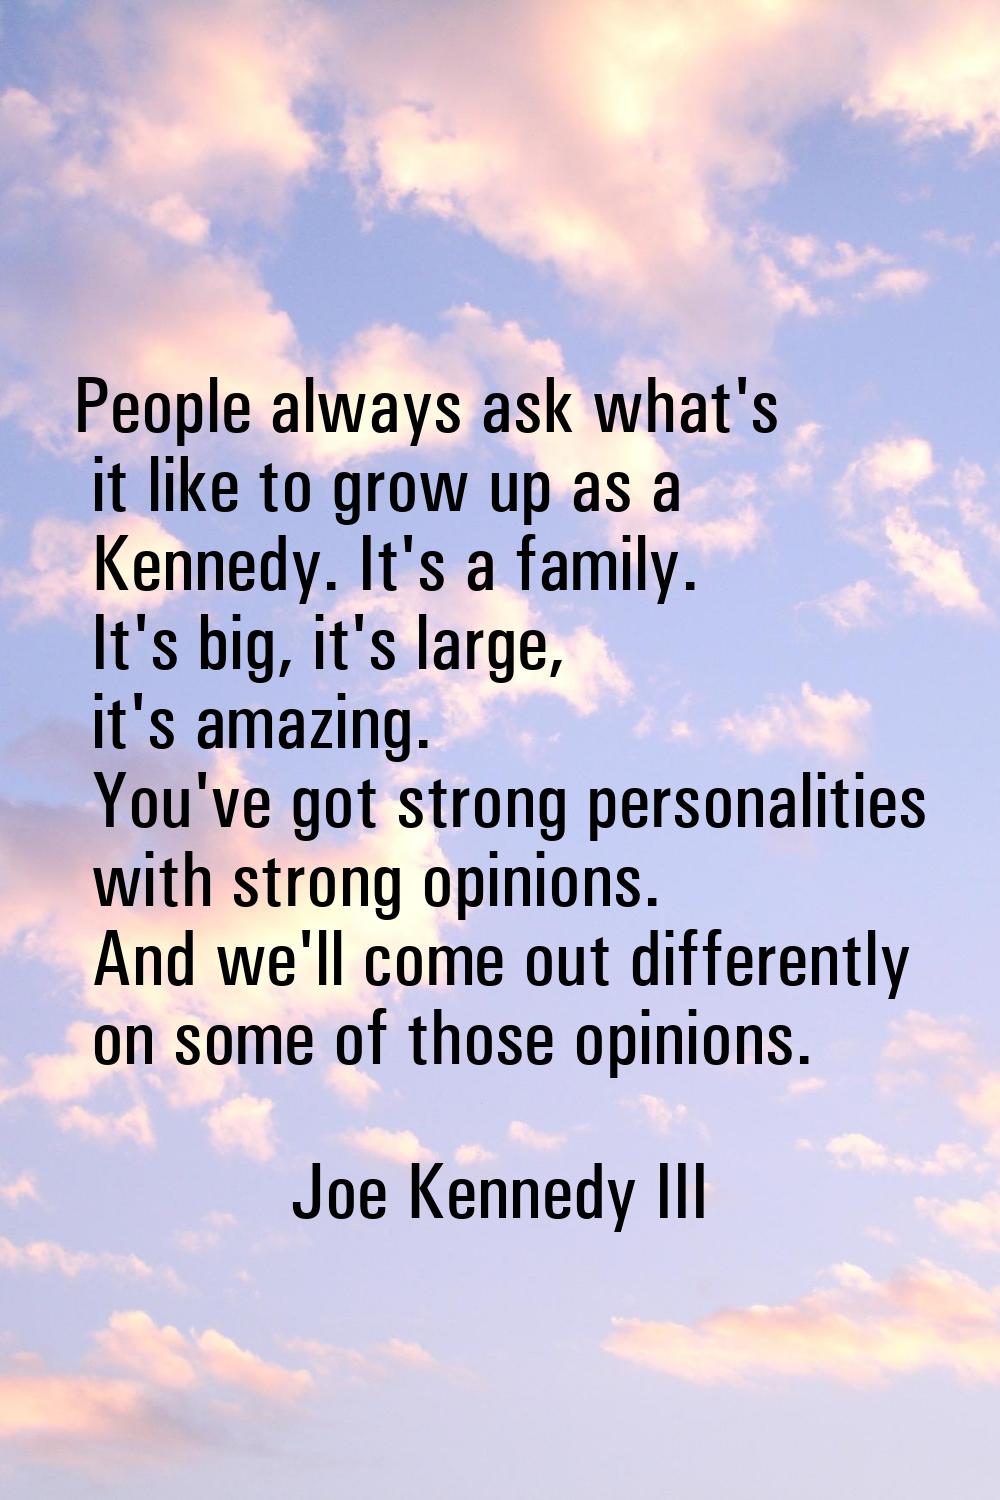 People always ask what's it like to grow up as a Kennedy. It's a family. It's big, it's large, it's